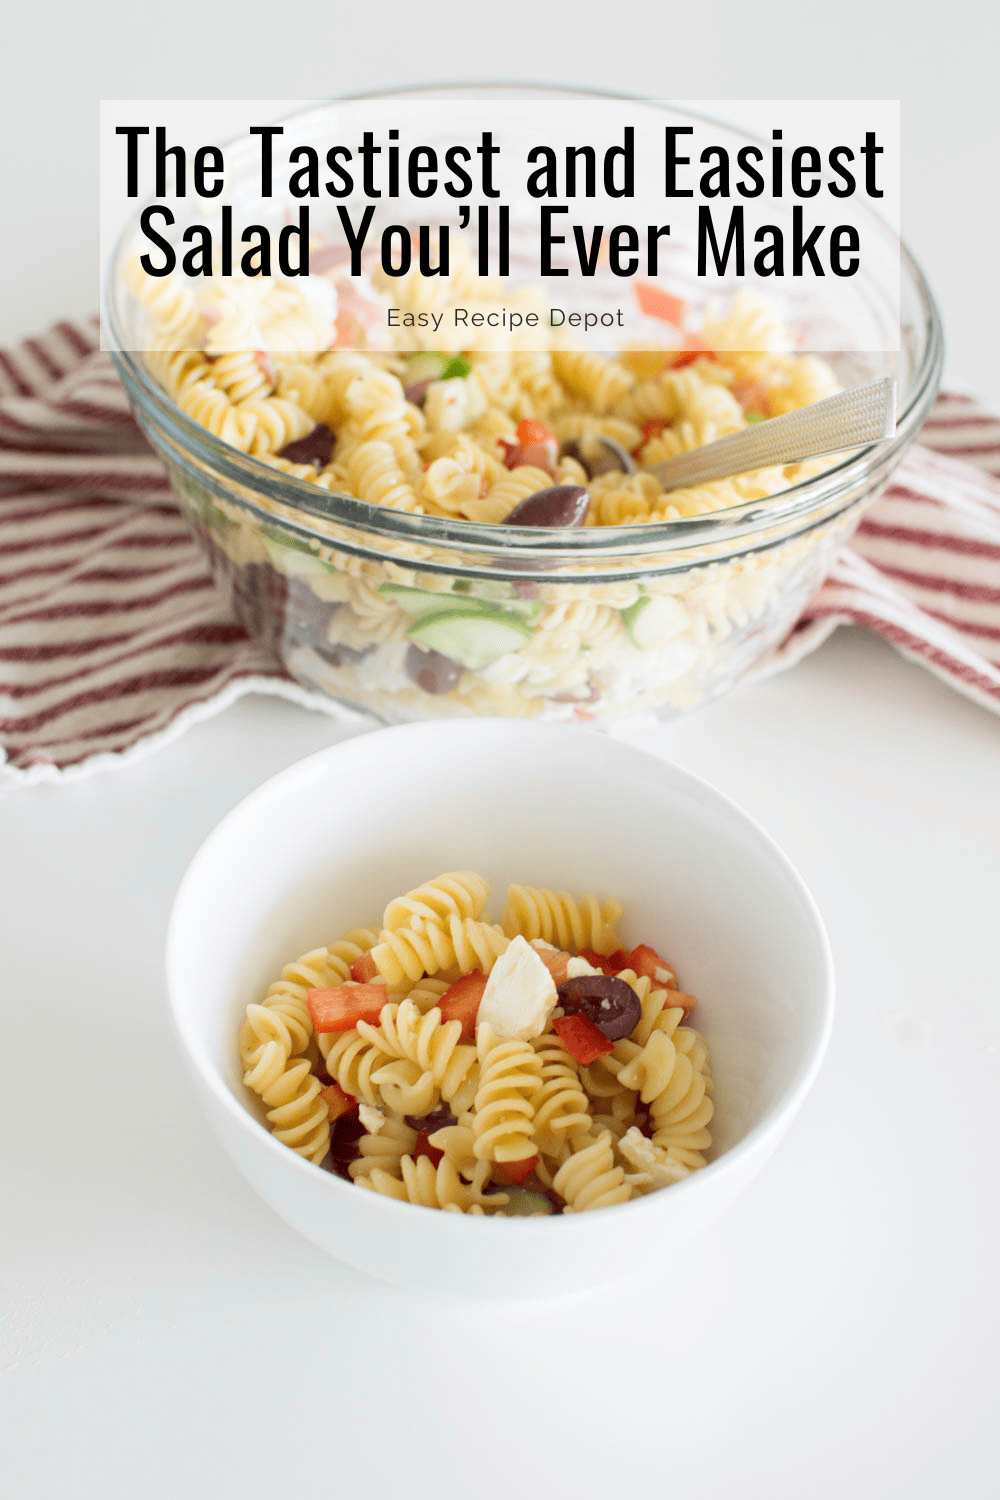 Homemade pasta salad being served in a white bowl